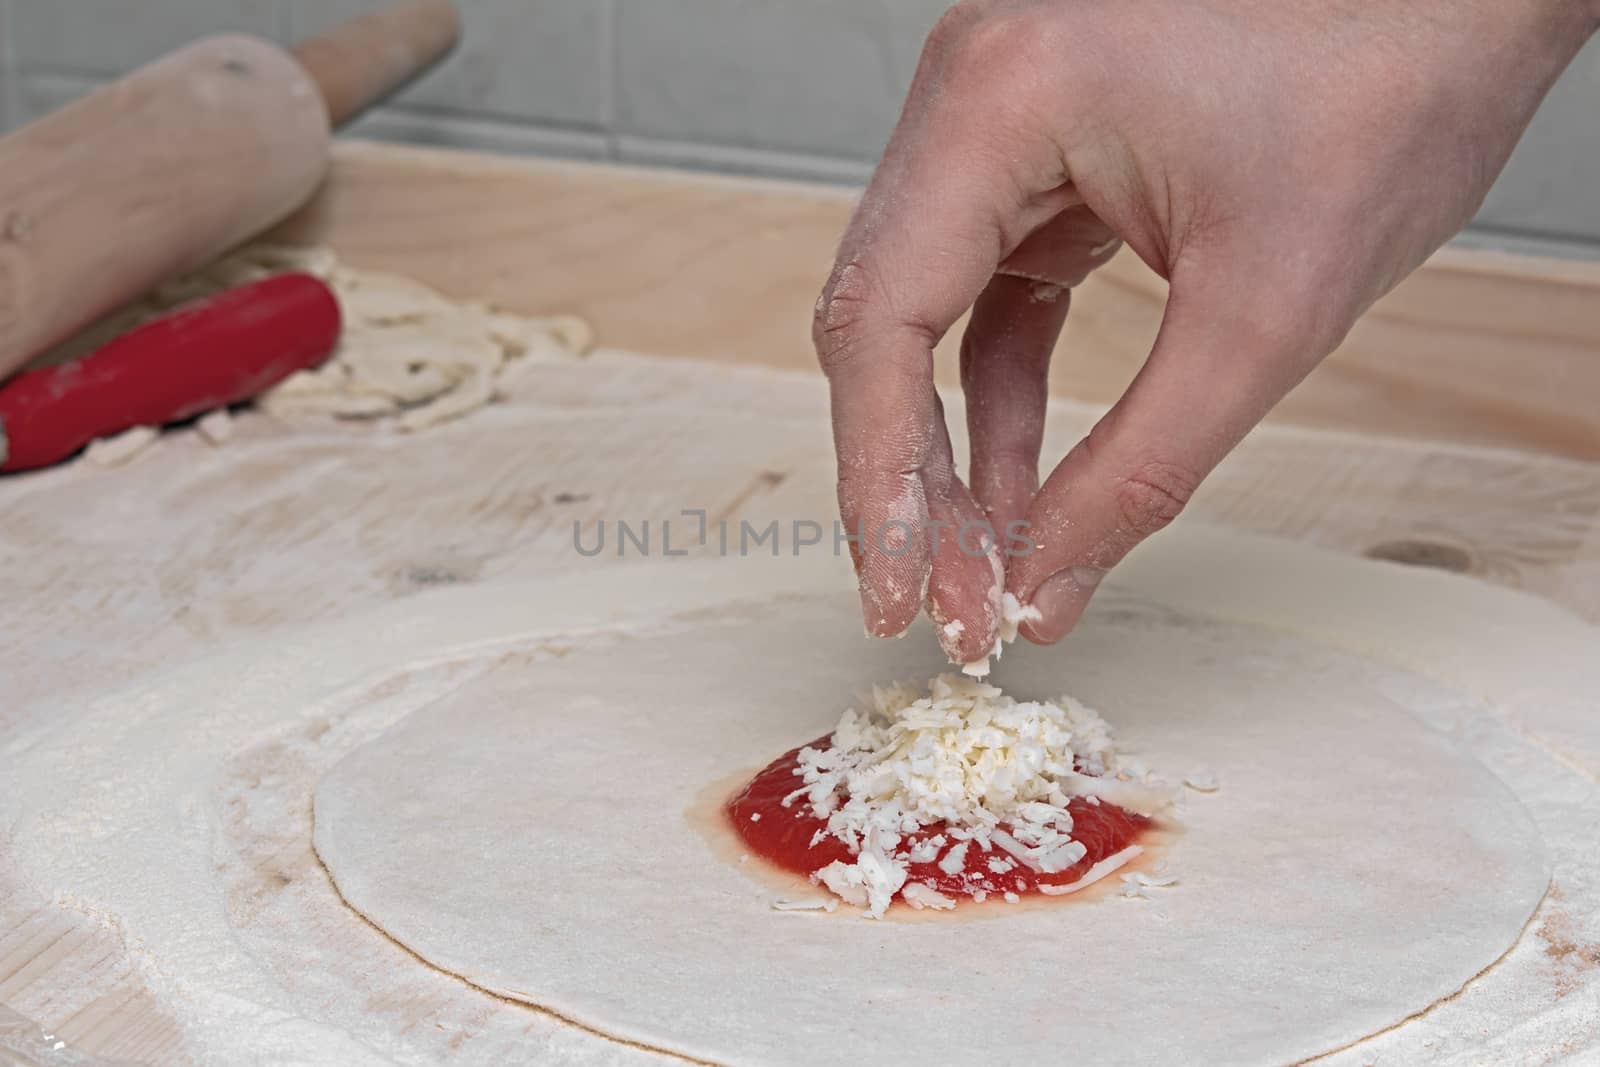 particularly the preparation of a traditional product southern Italy